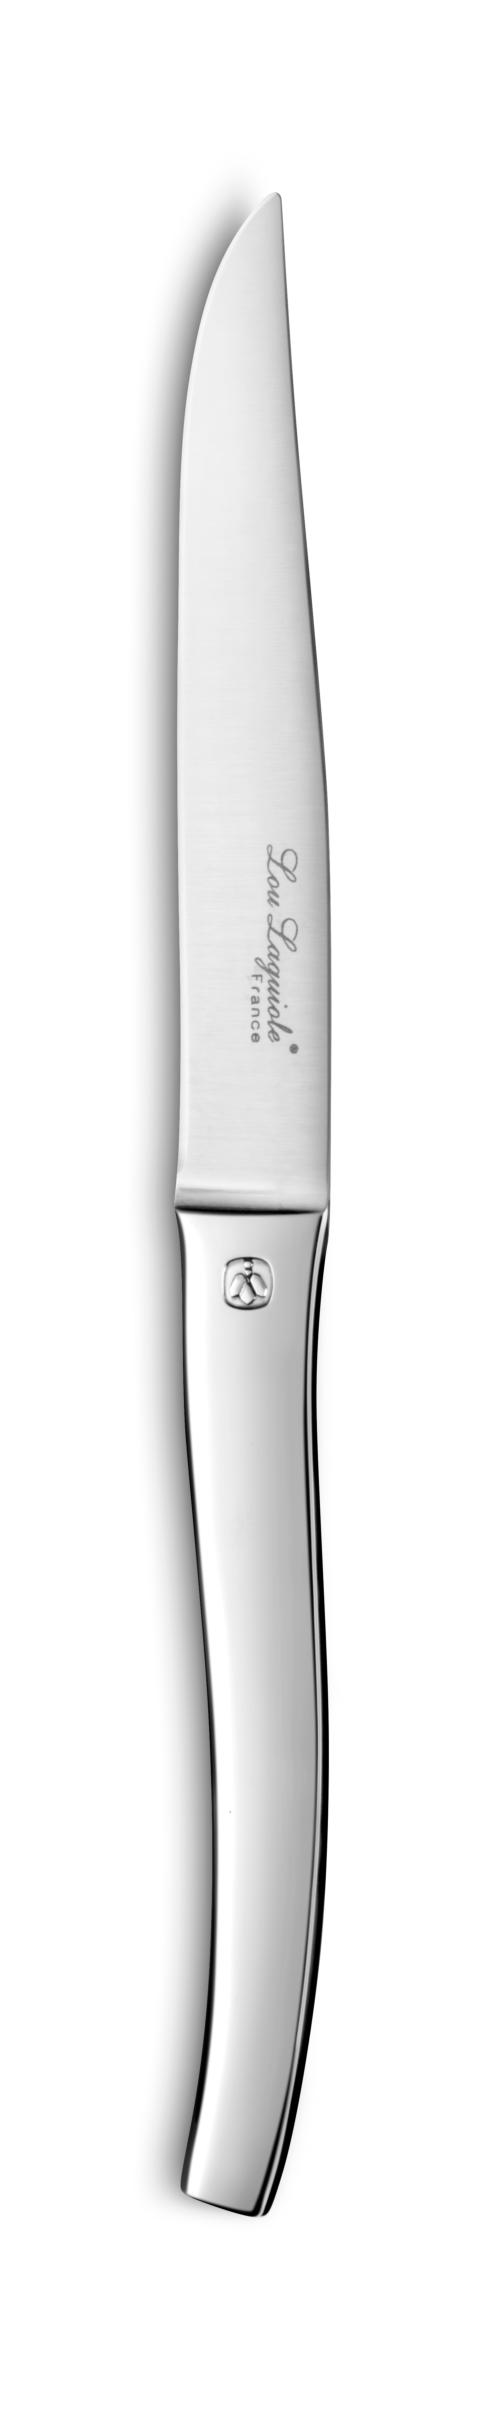 $132.00 Abeille S/4 Smooth Stainless